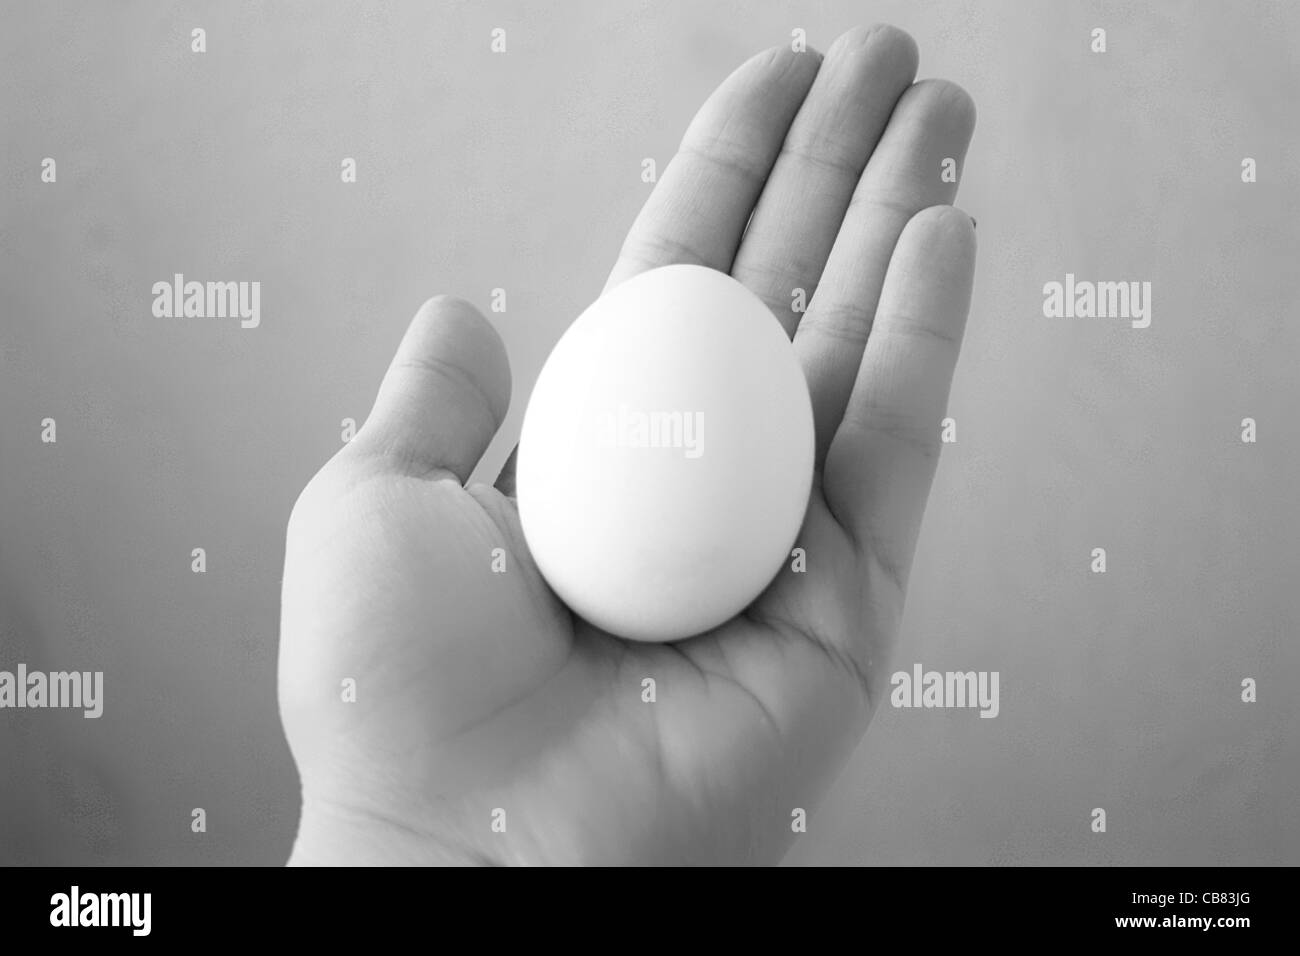 Egg in a hand Stock Photo